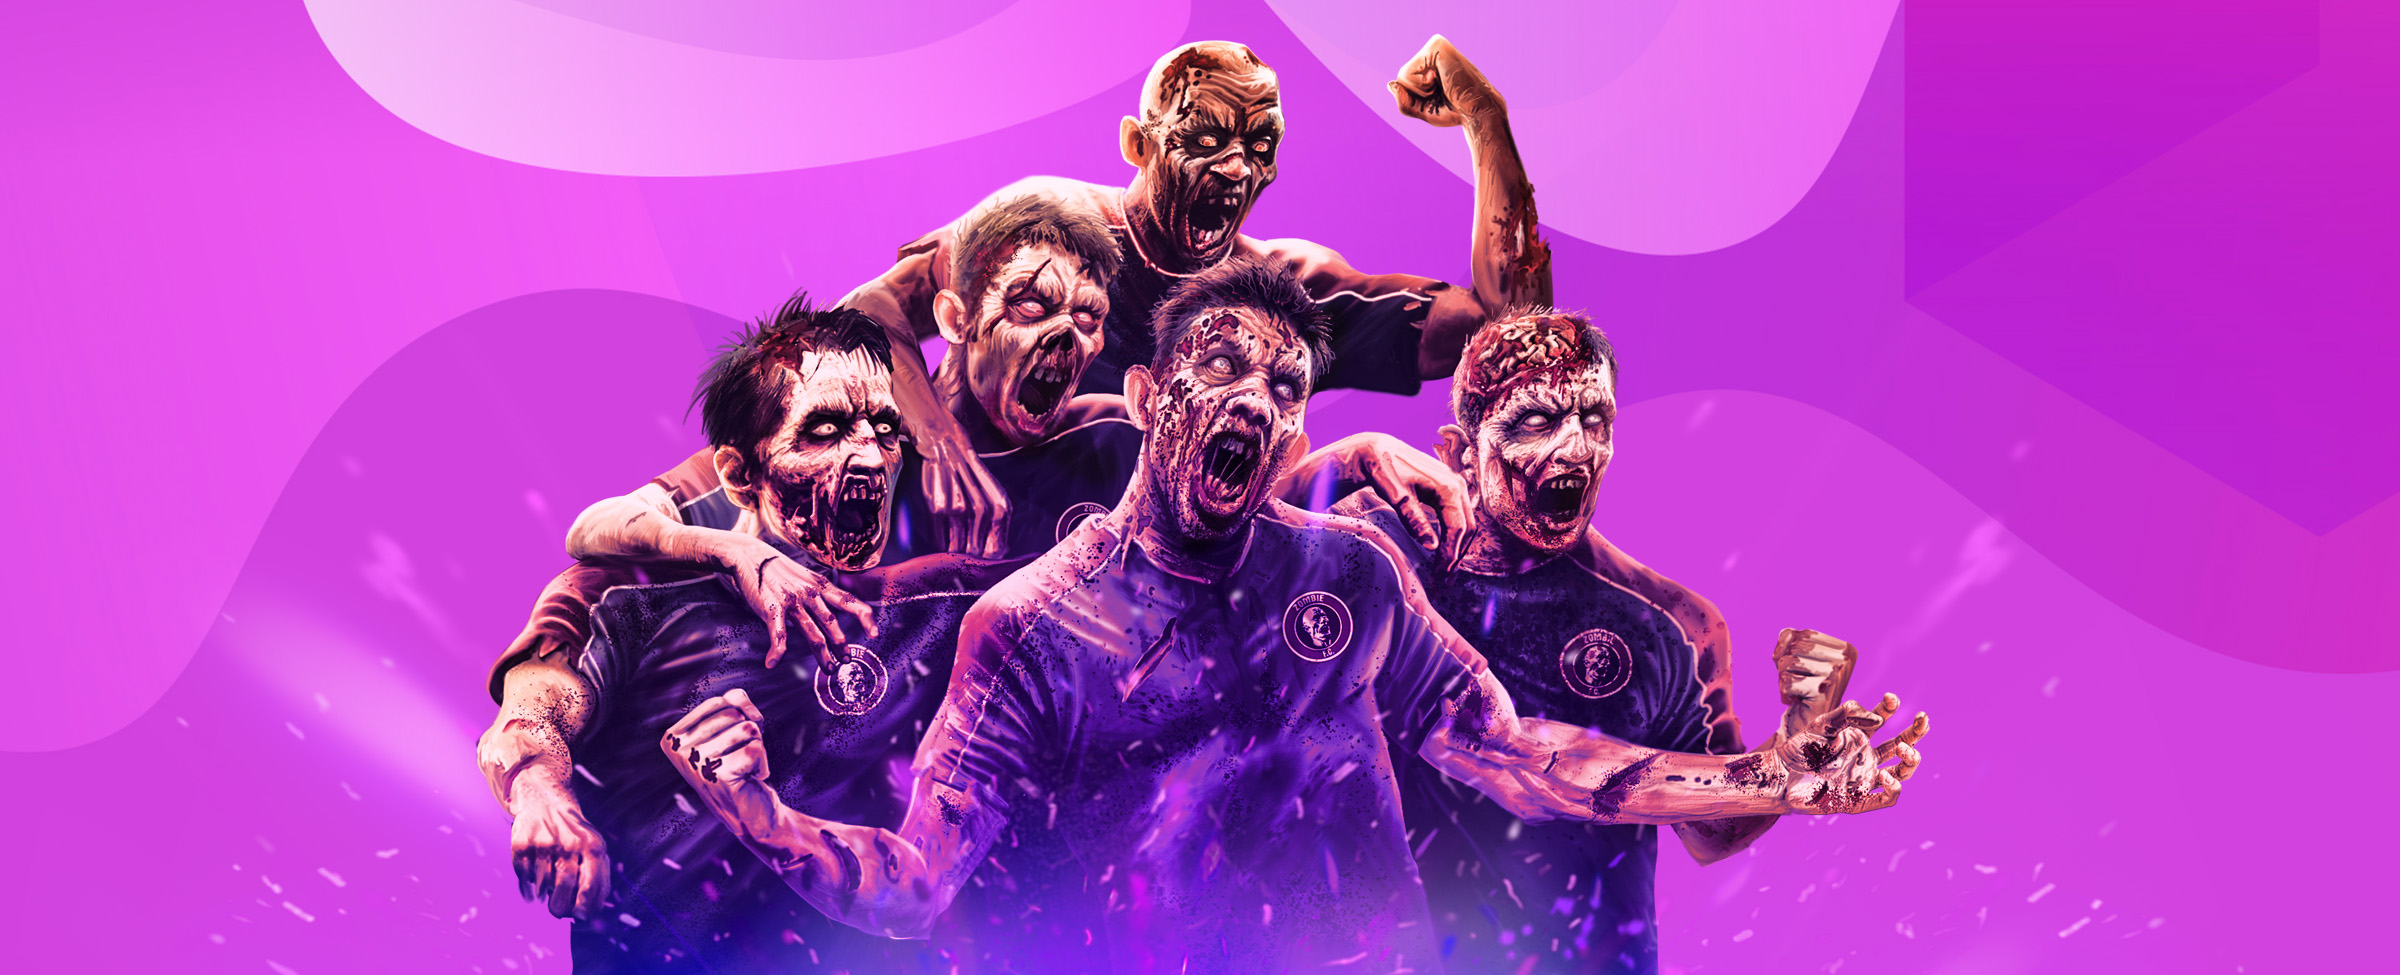 Five zombie soccer players from Zombie FC slot at SlotsLV yelling as they cheer on a slots win 